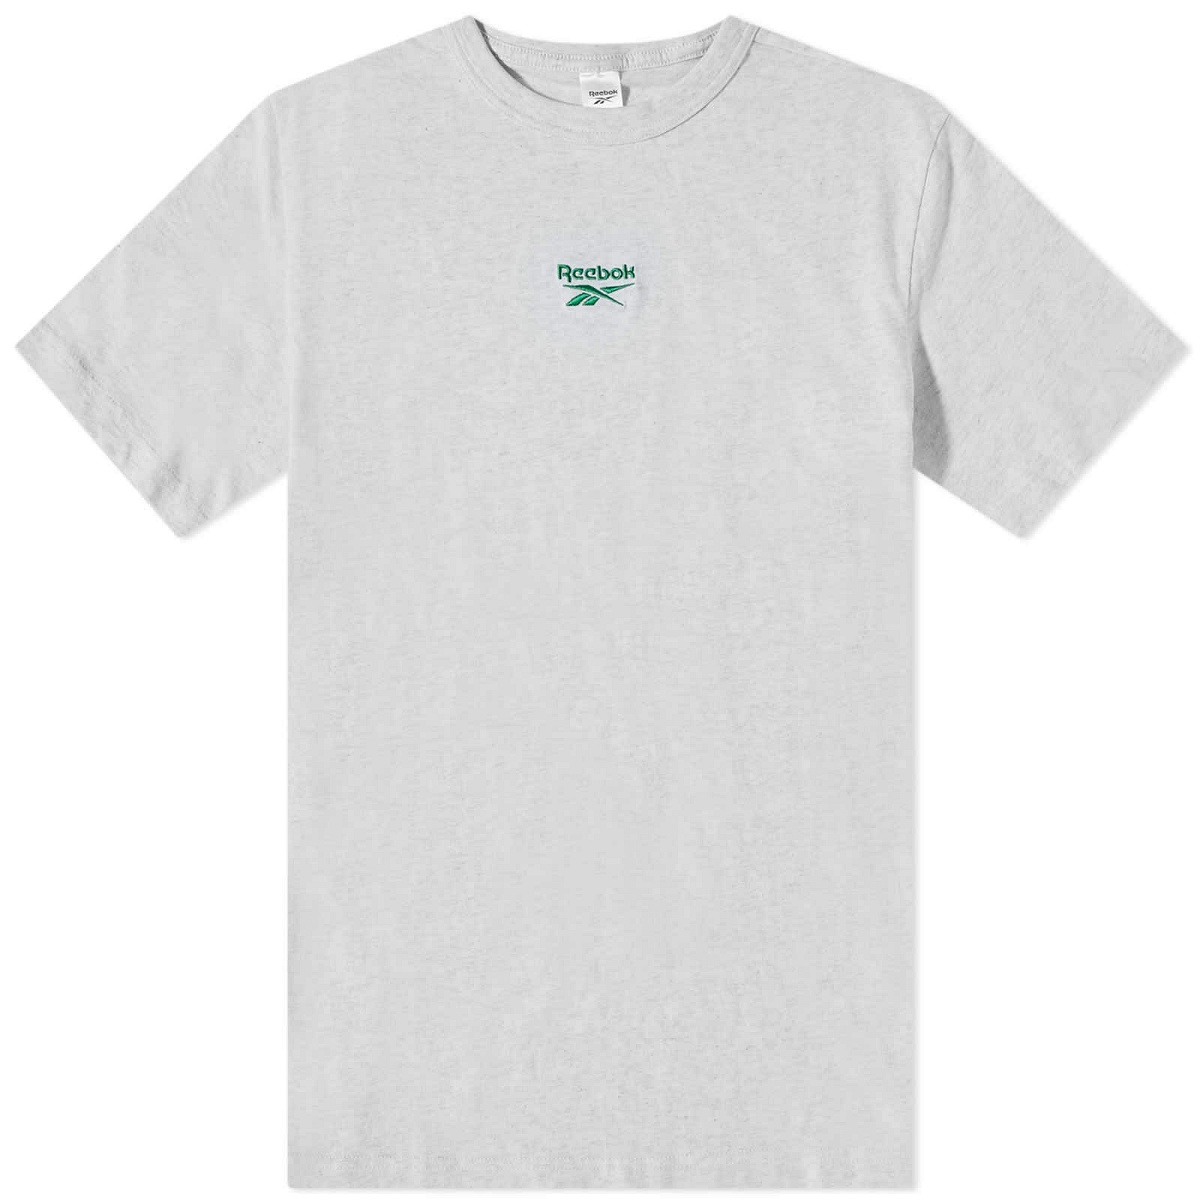 Reebok by Pyer Moss 3 Collection T-Shirt White Graphic Reebok